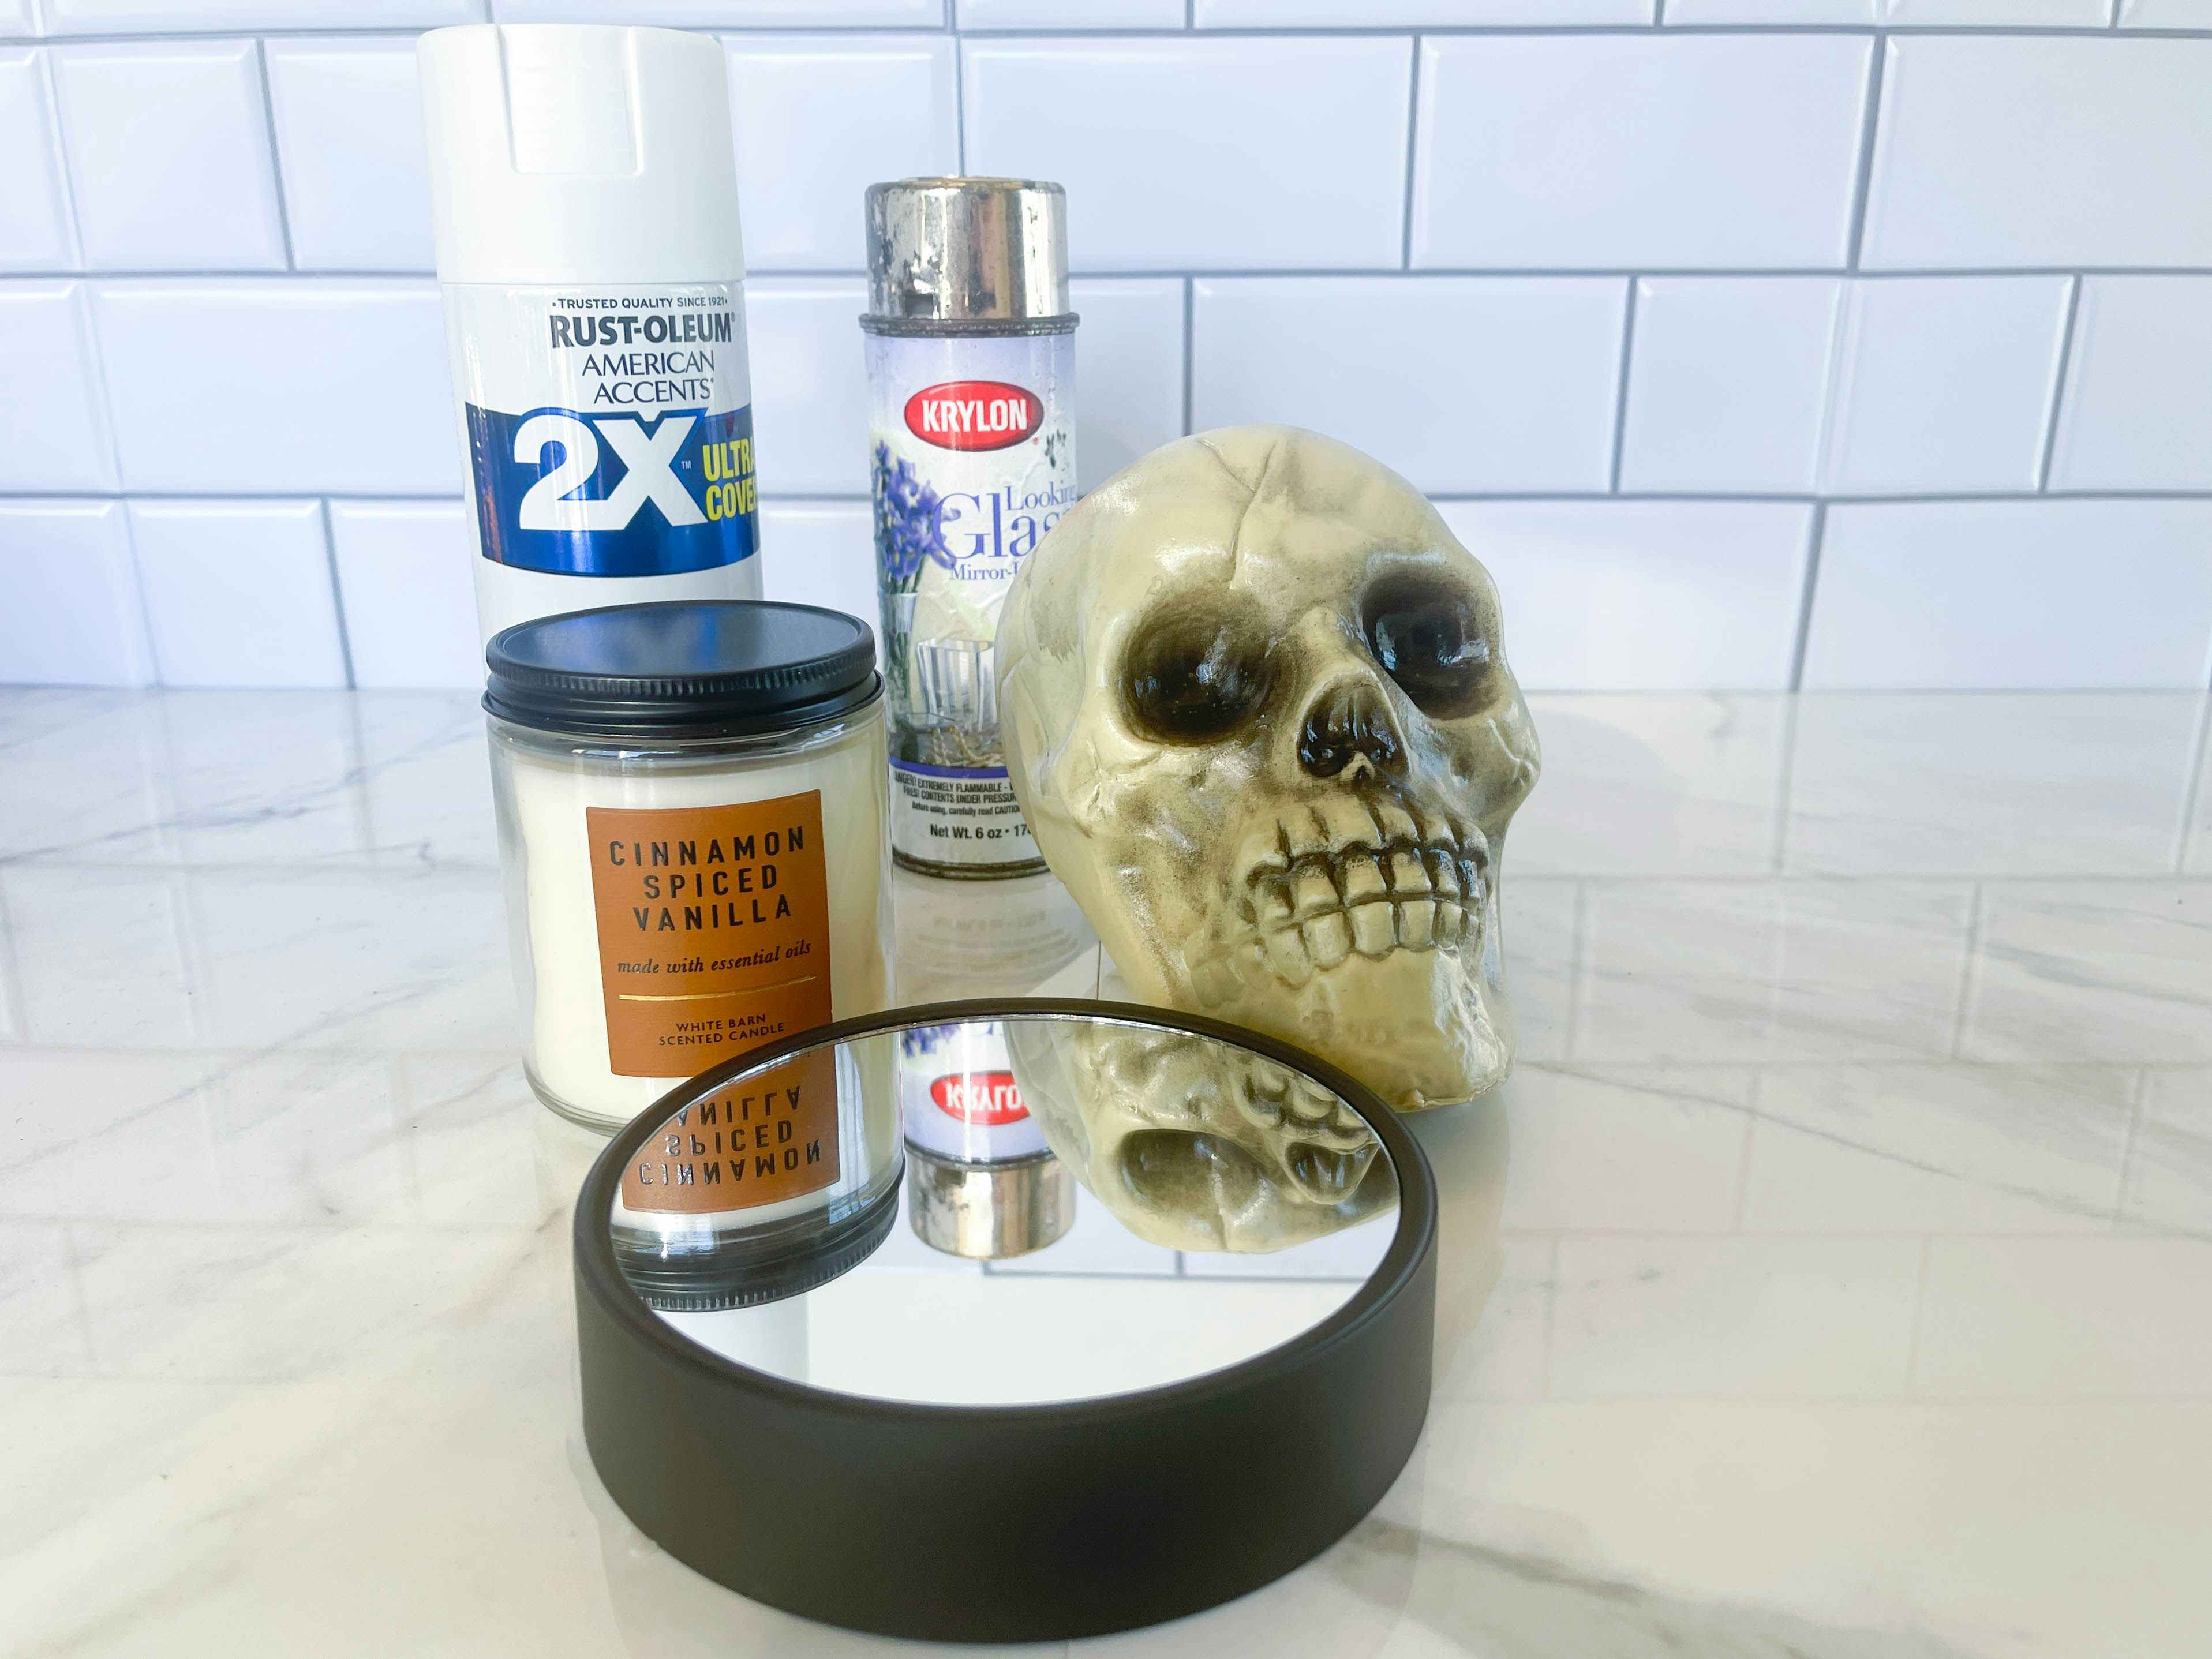 a plastic skull, mirrored candle holder, candle, and spray paint sitting on the counter ready for a diy project